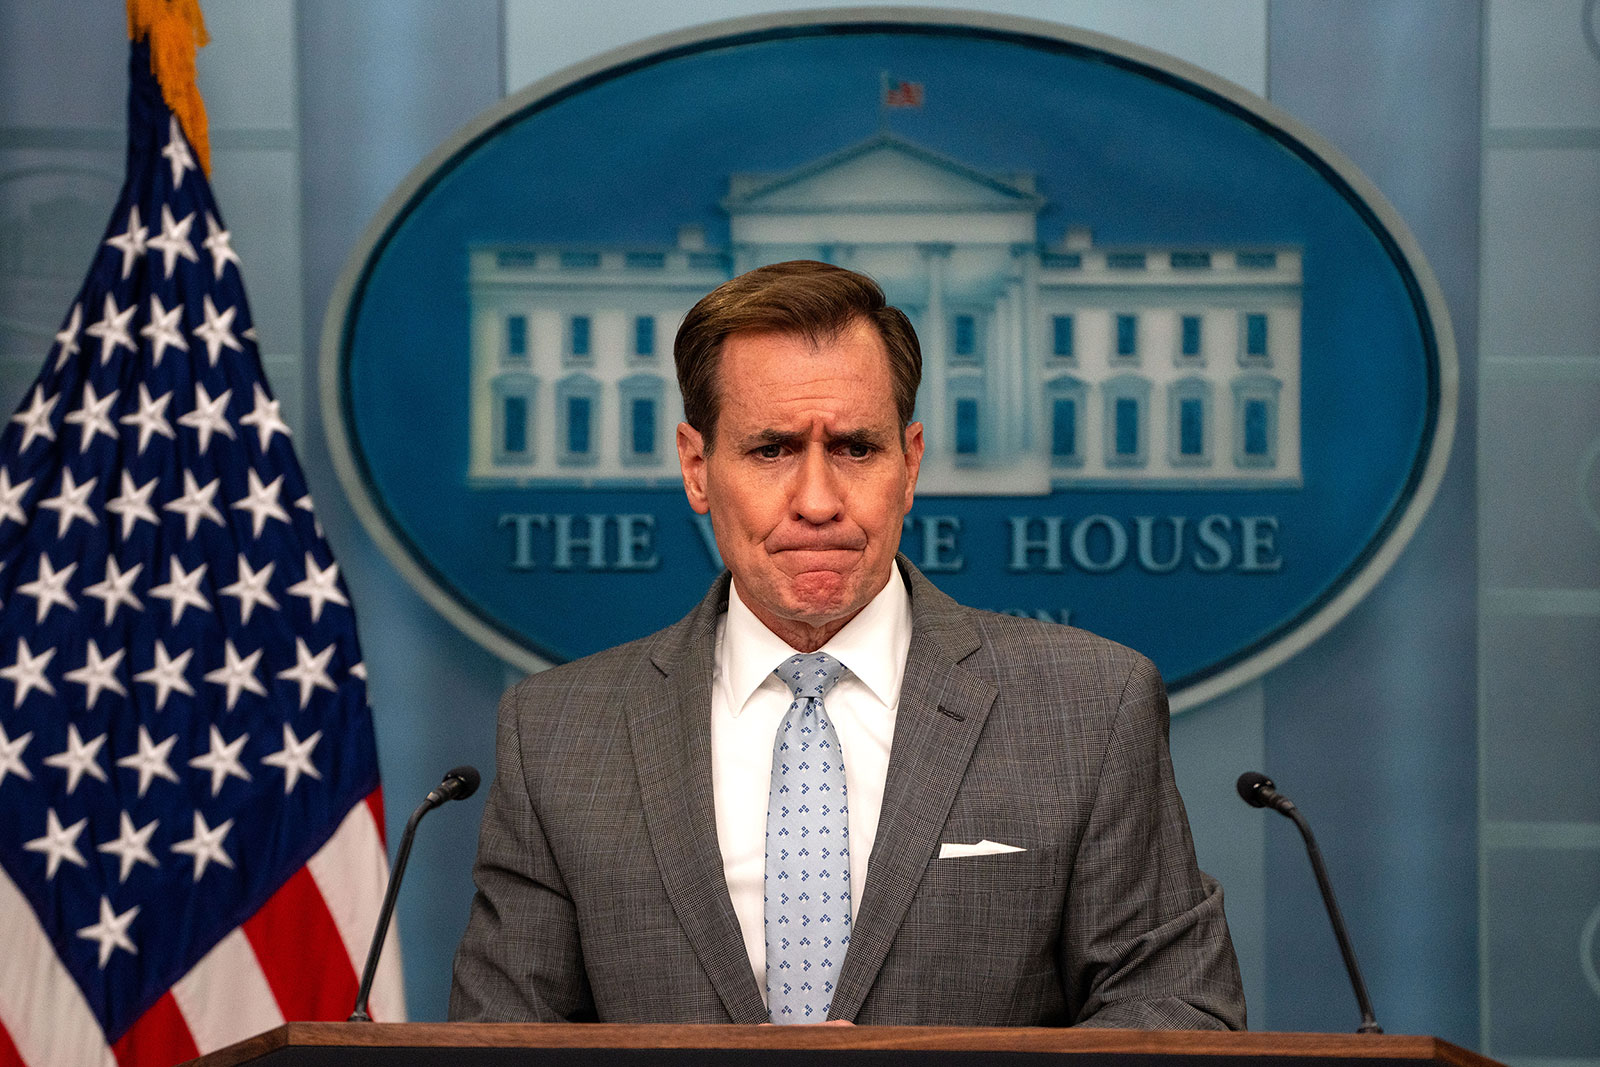 White House National Security Communications Advisor John Kirby takes questions during a news briefing at the White House on Tuesday, April 2.